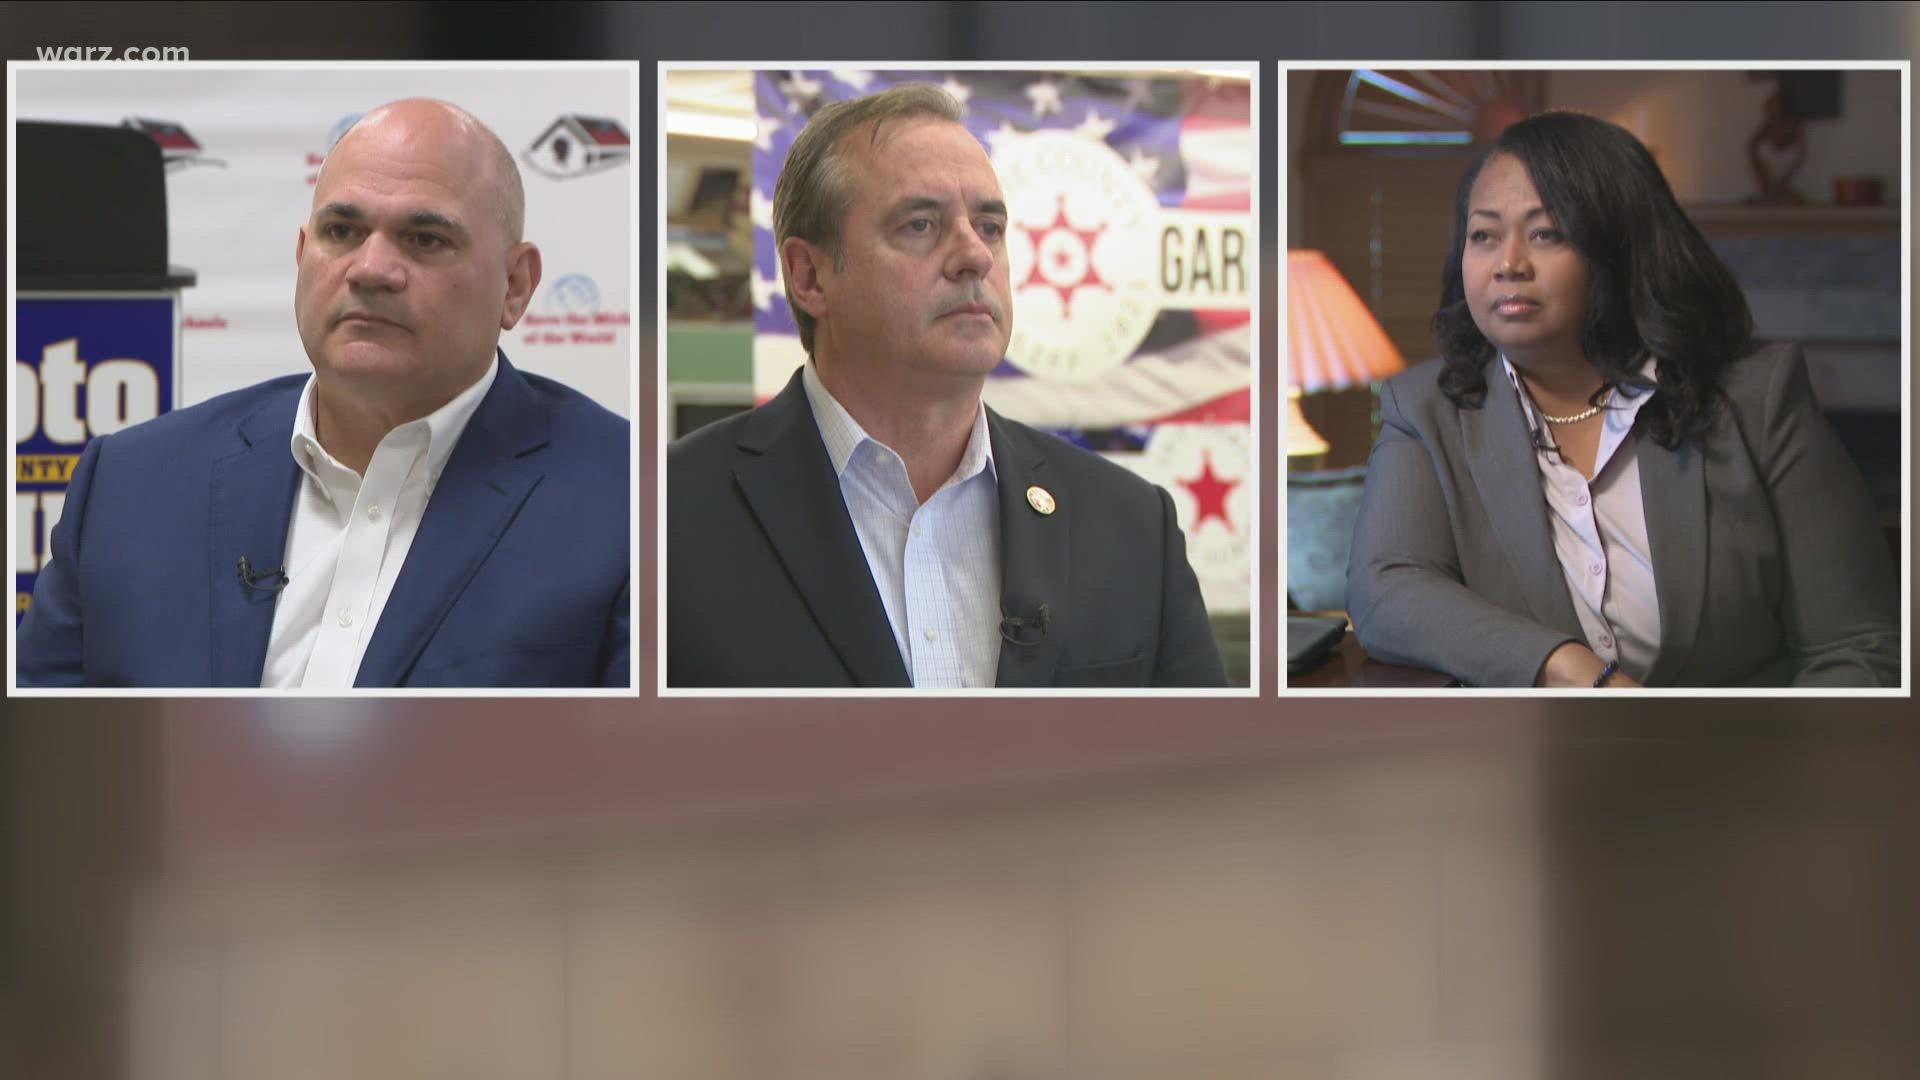 Claudine Ewing sat down with three candidates for ERIE COUNTY SHERIFF...TED DINOTO,JOHN GARCIA, AND KIMberly BEATY